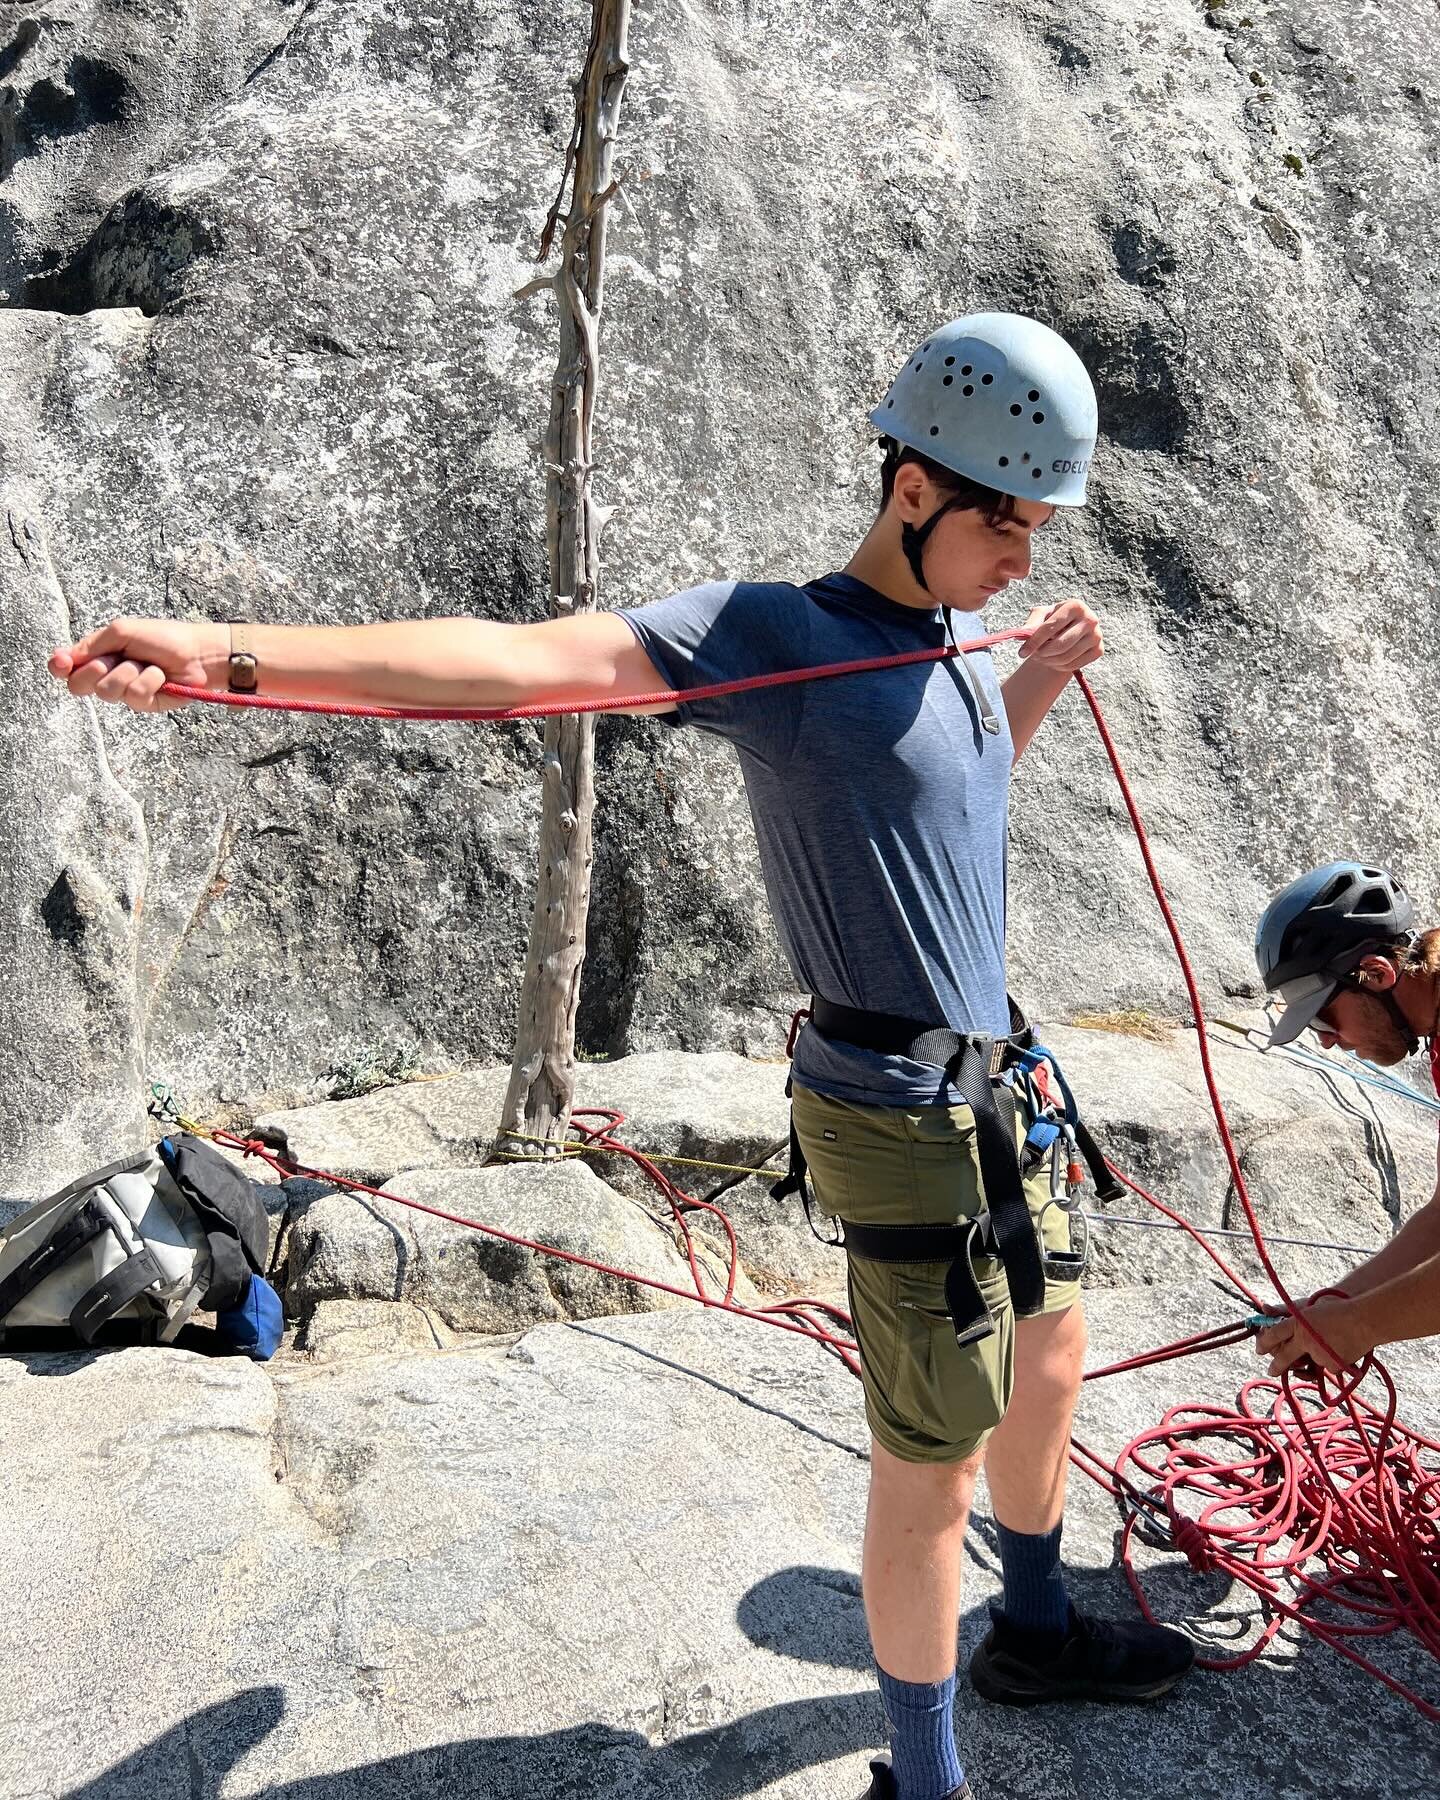 2023 was a huge year for Sierra STEM! We ran our first-ever local summer camps in June Lake, took students backpacking in Yosemite National Park, dissected brains, and hired our full-time Associate Program Director, Jackie! It was also a record-shatt